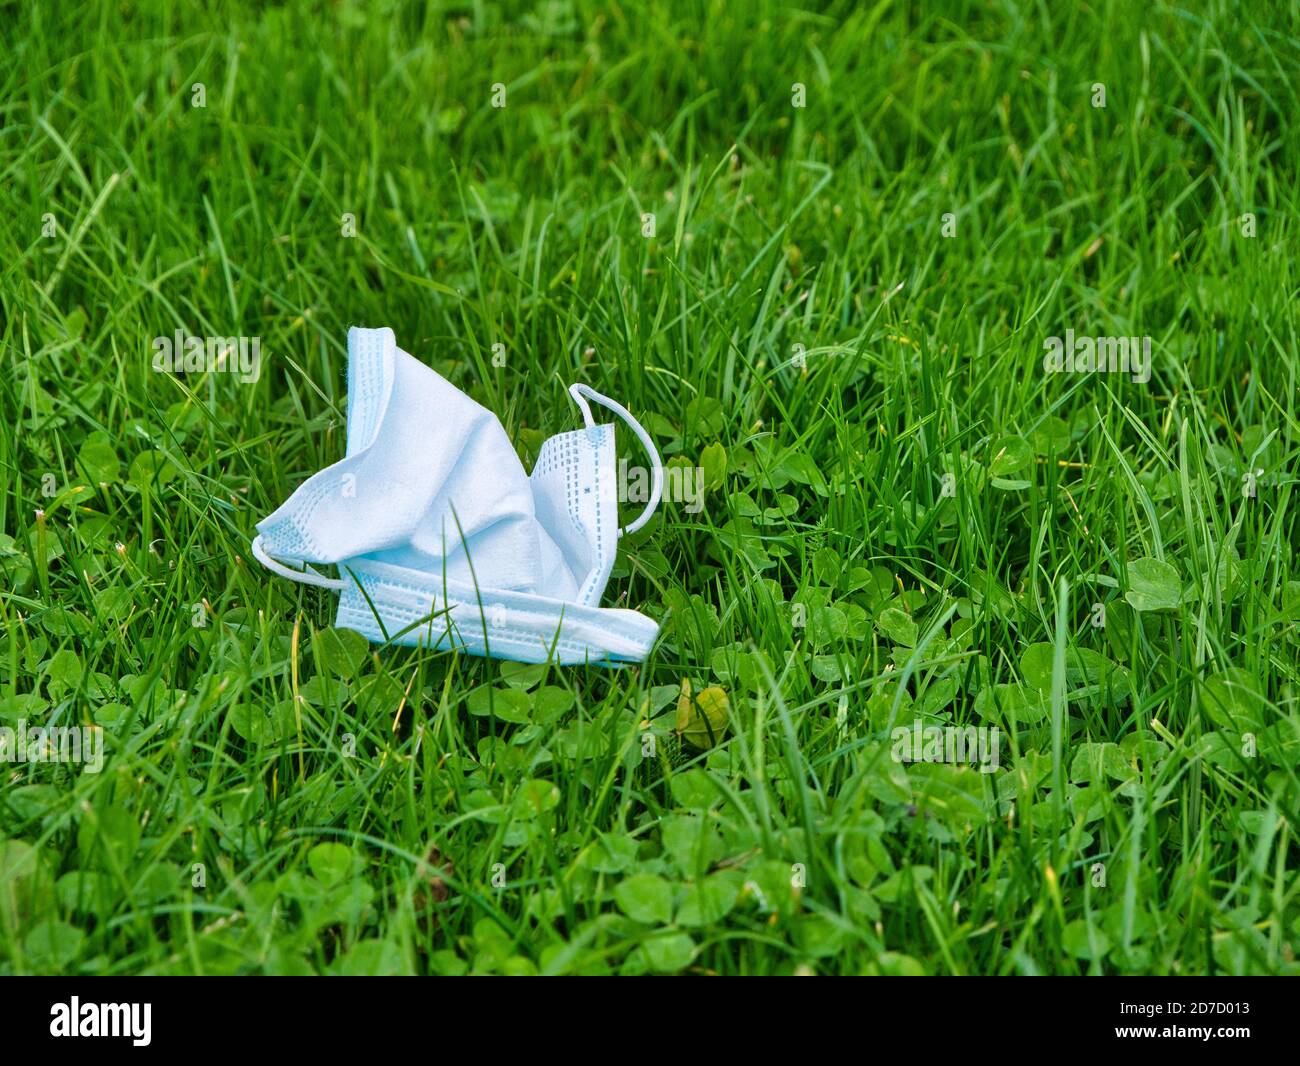 A used, blue surgical face mask used for COVID-19 PPE protection, discarded as litter on grass in a rural area Stock Photo